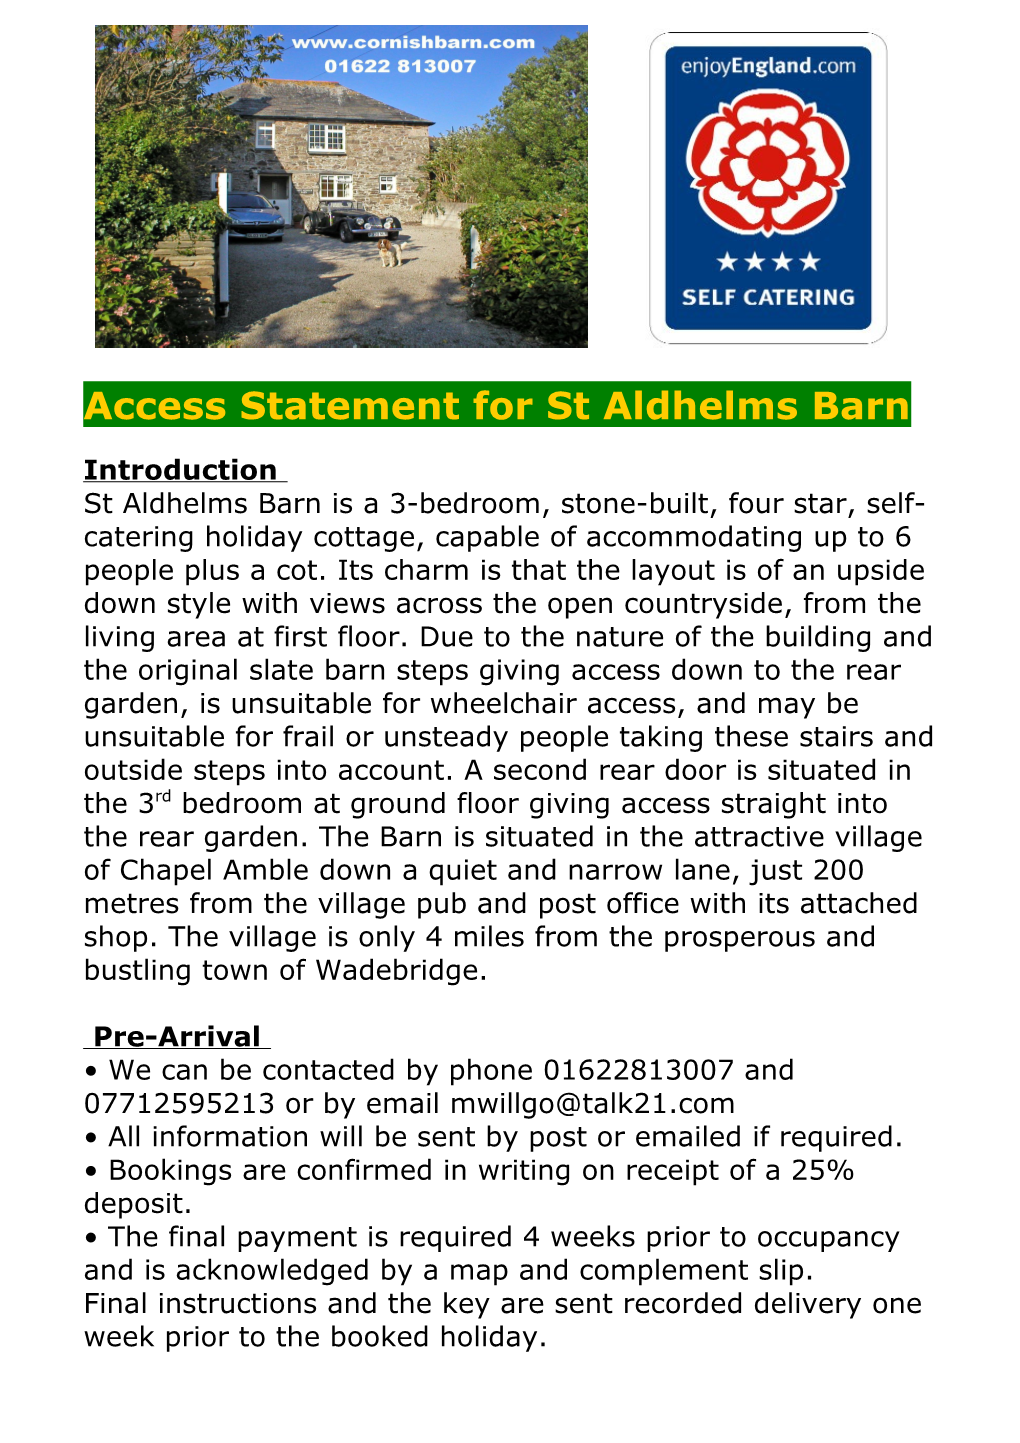 Access Statement for St Aldhelms Barn